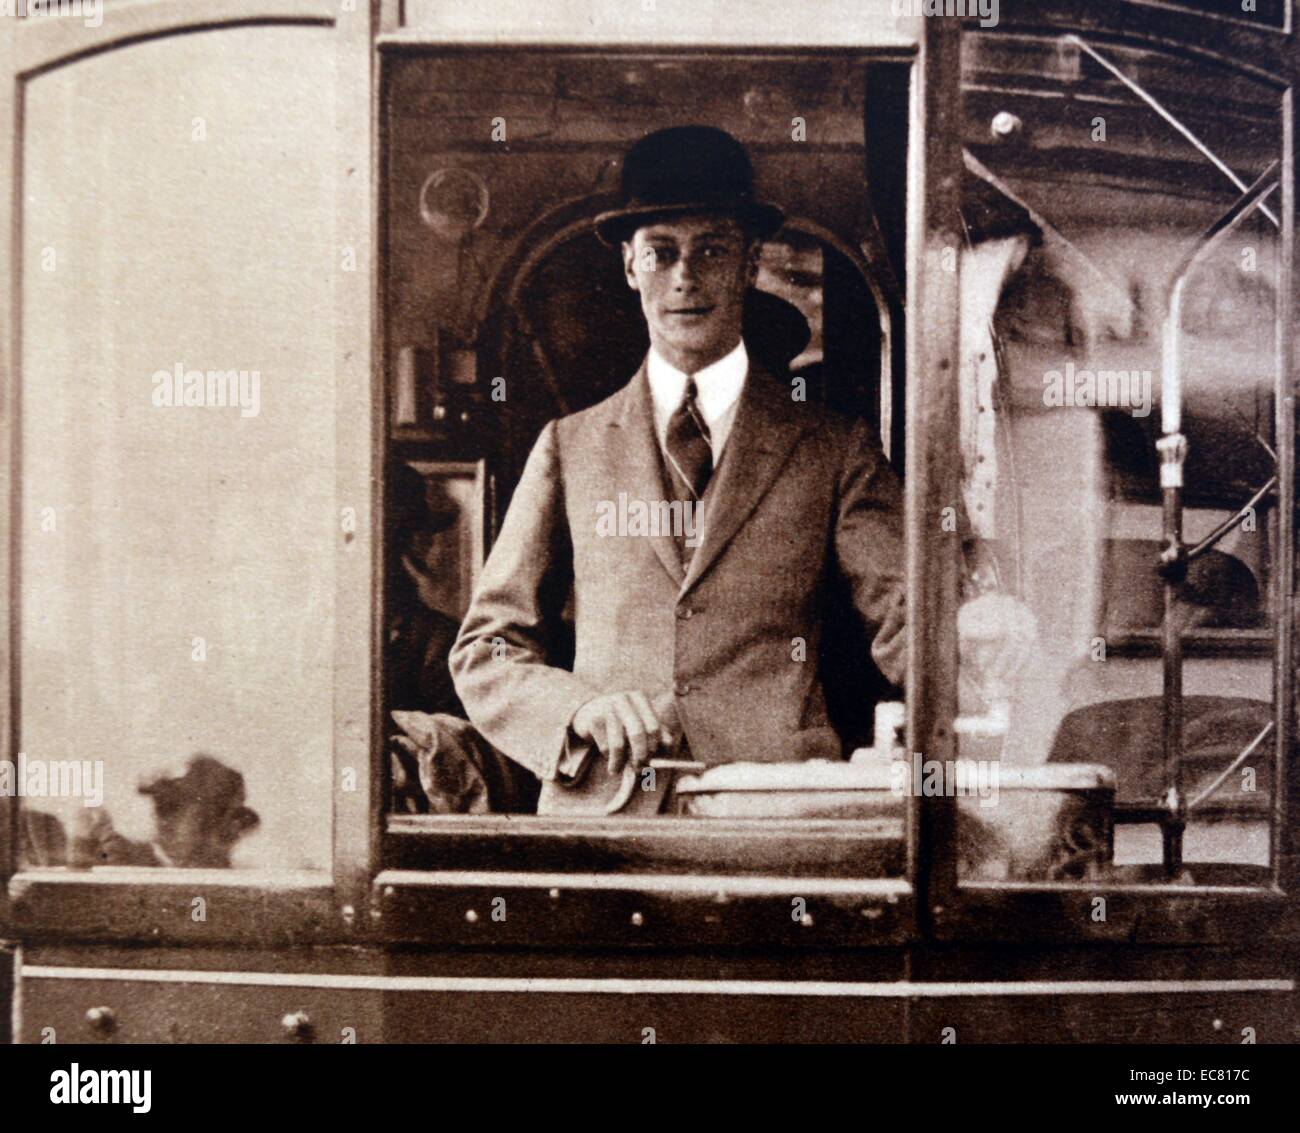 Prince Albert, later King George VI drives a tram, during his visit to Glasgow, Scotland. Stock Photo